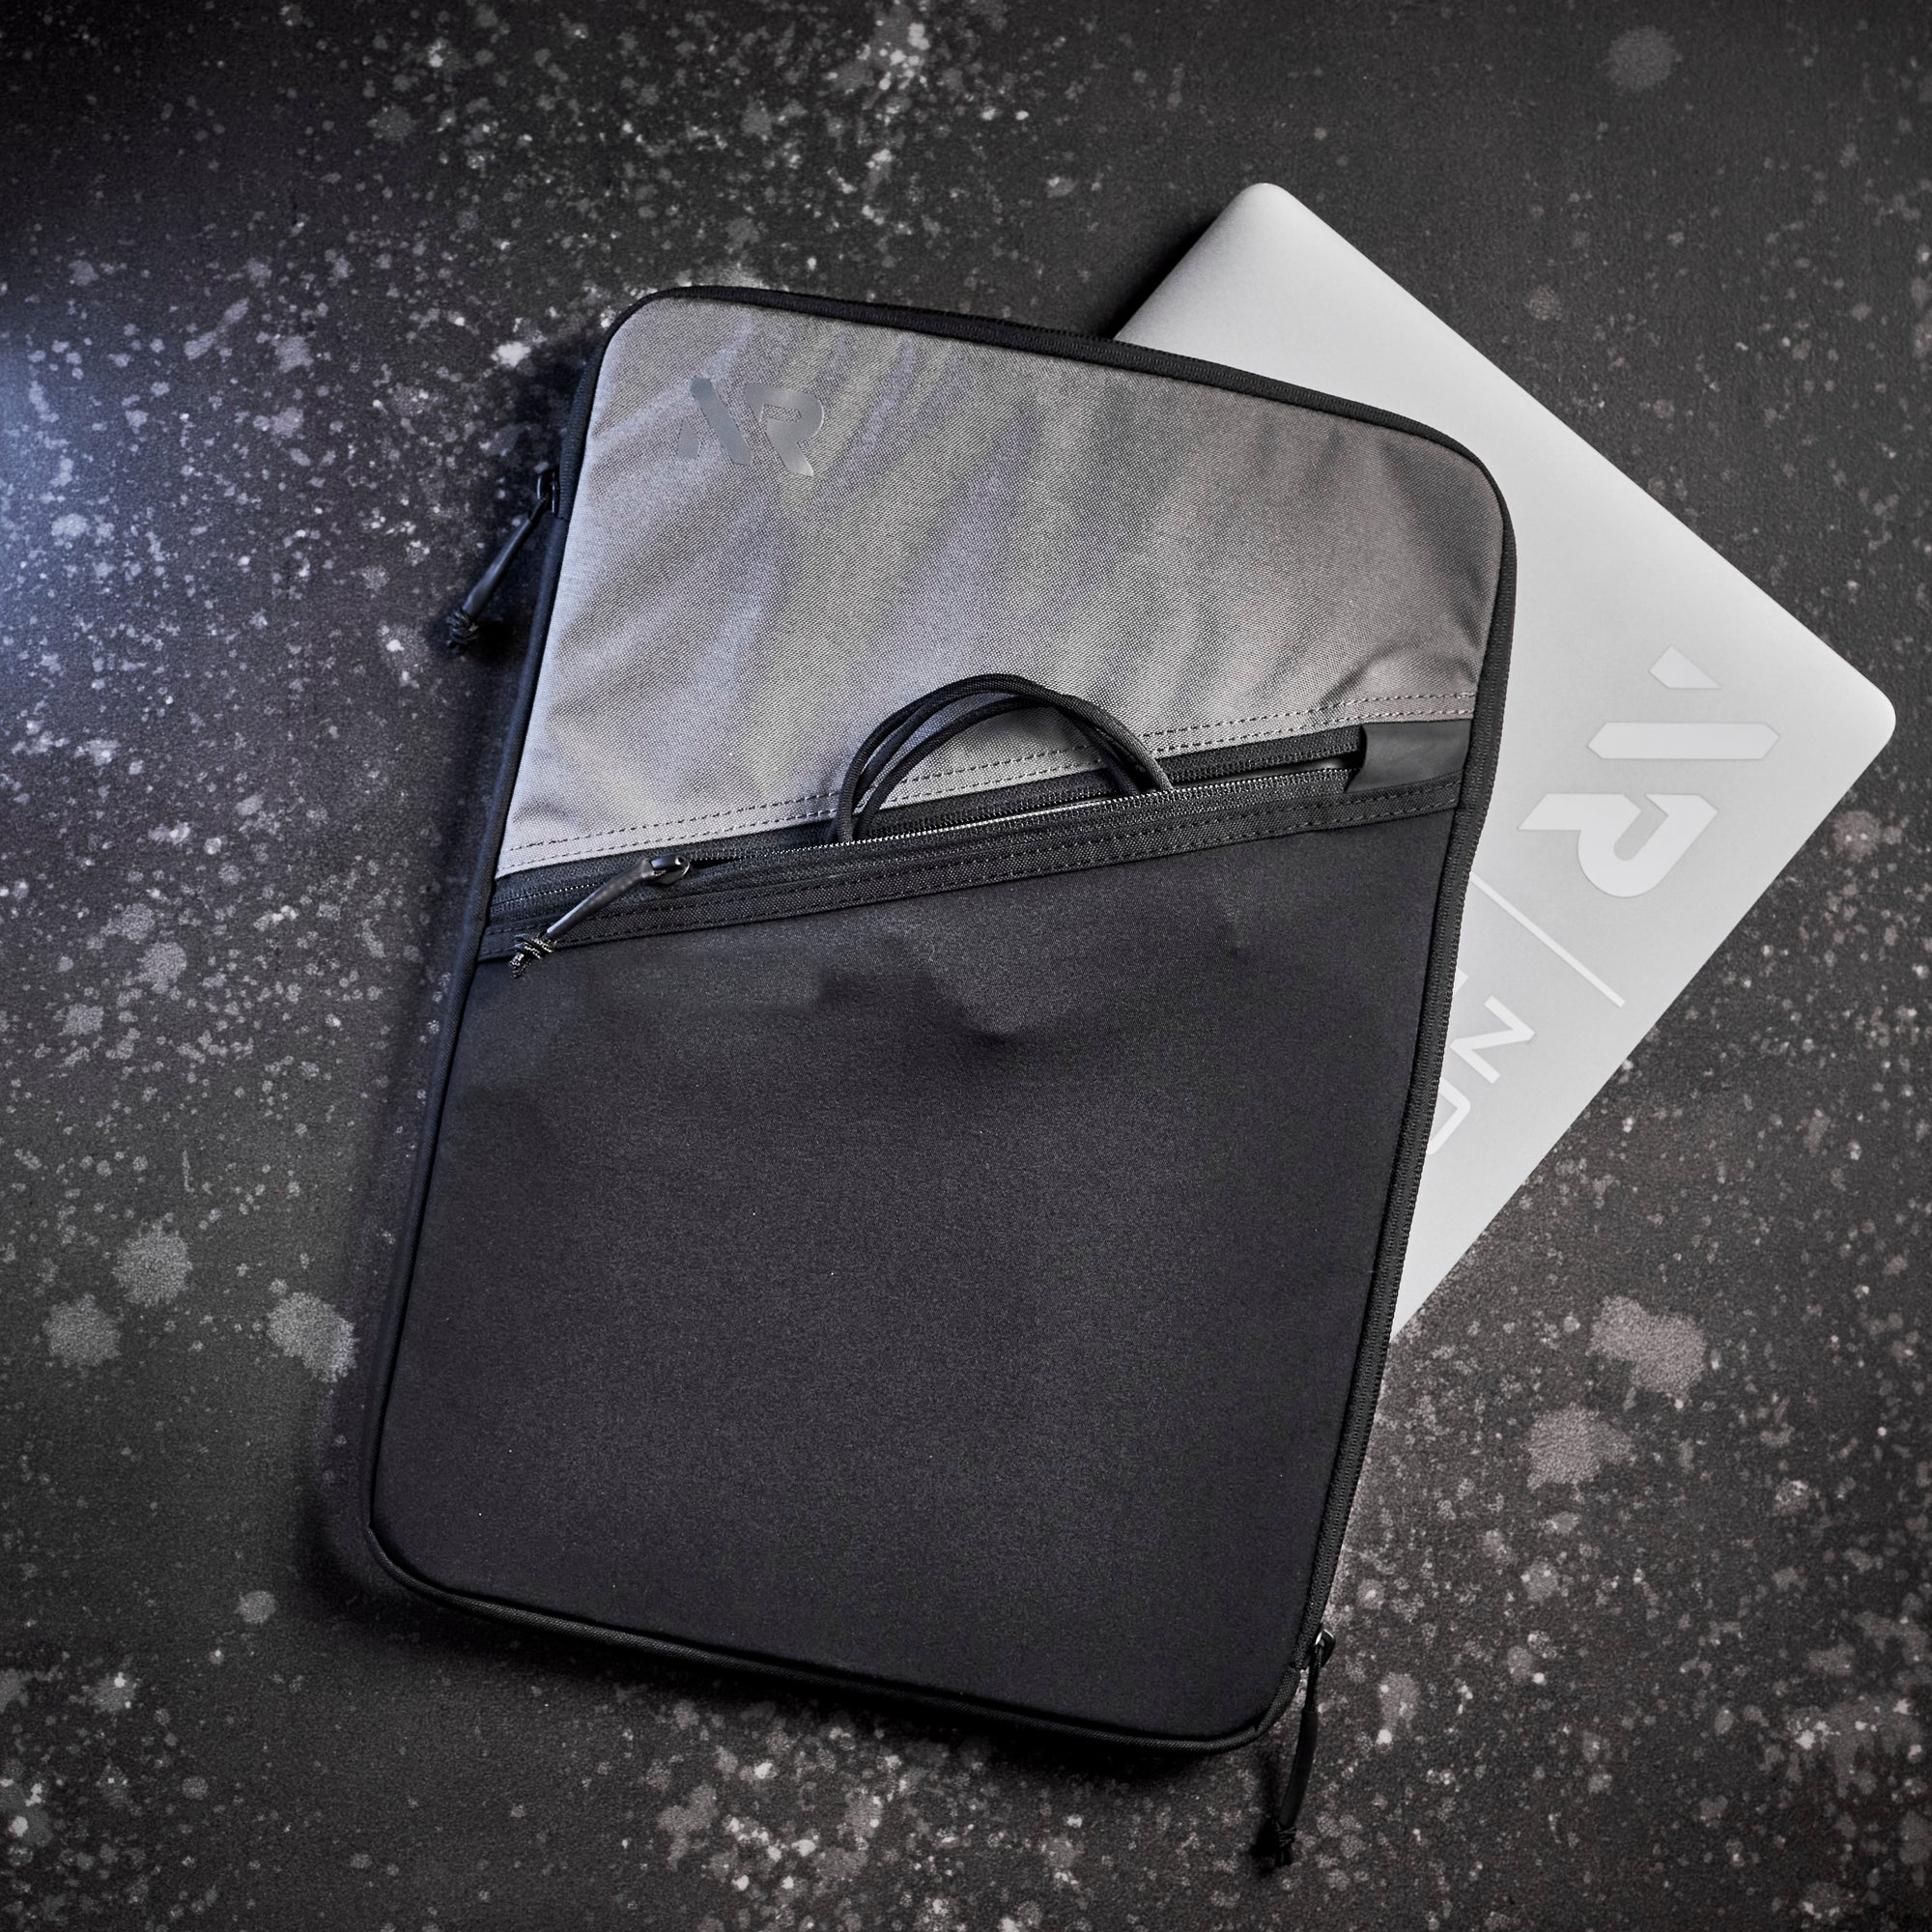 The Ultimate Travel Companion: Protect Your Tech in Style